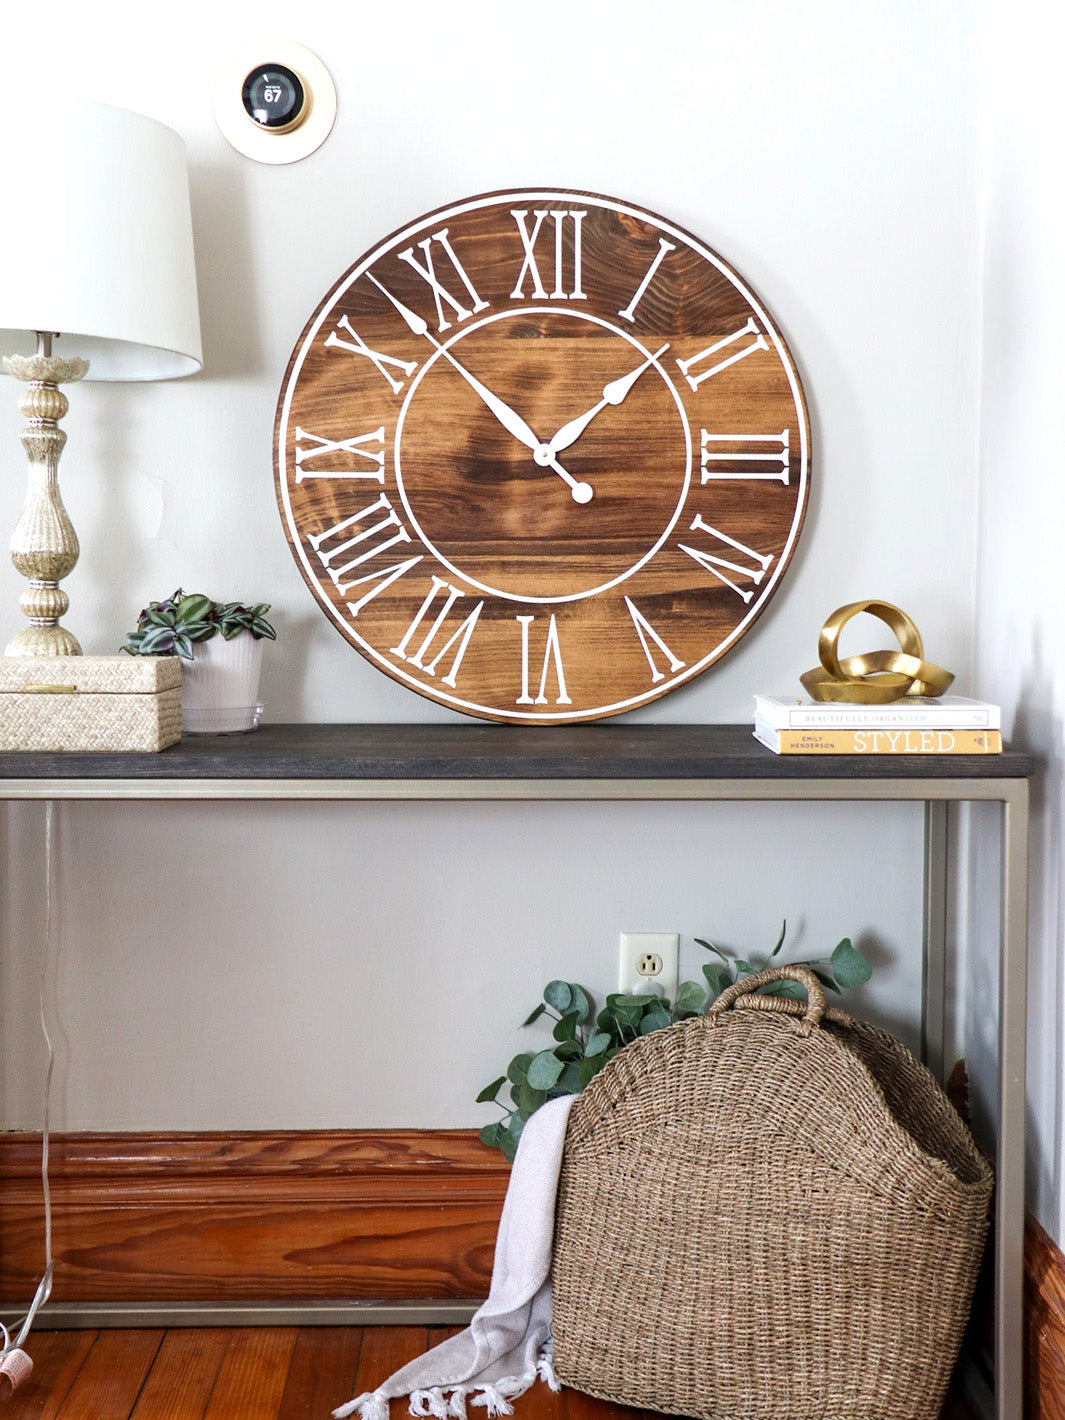 Light Stained Large Farmhouse Wall Clock with White Roman Numerals & Lines Earthly Comfort Clocks 1534-7